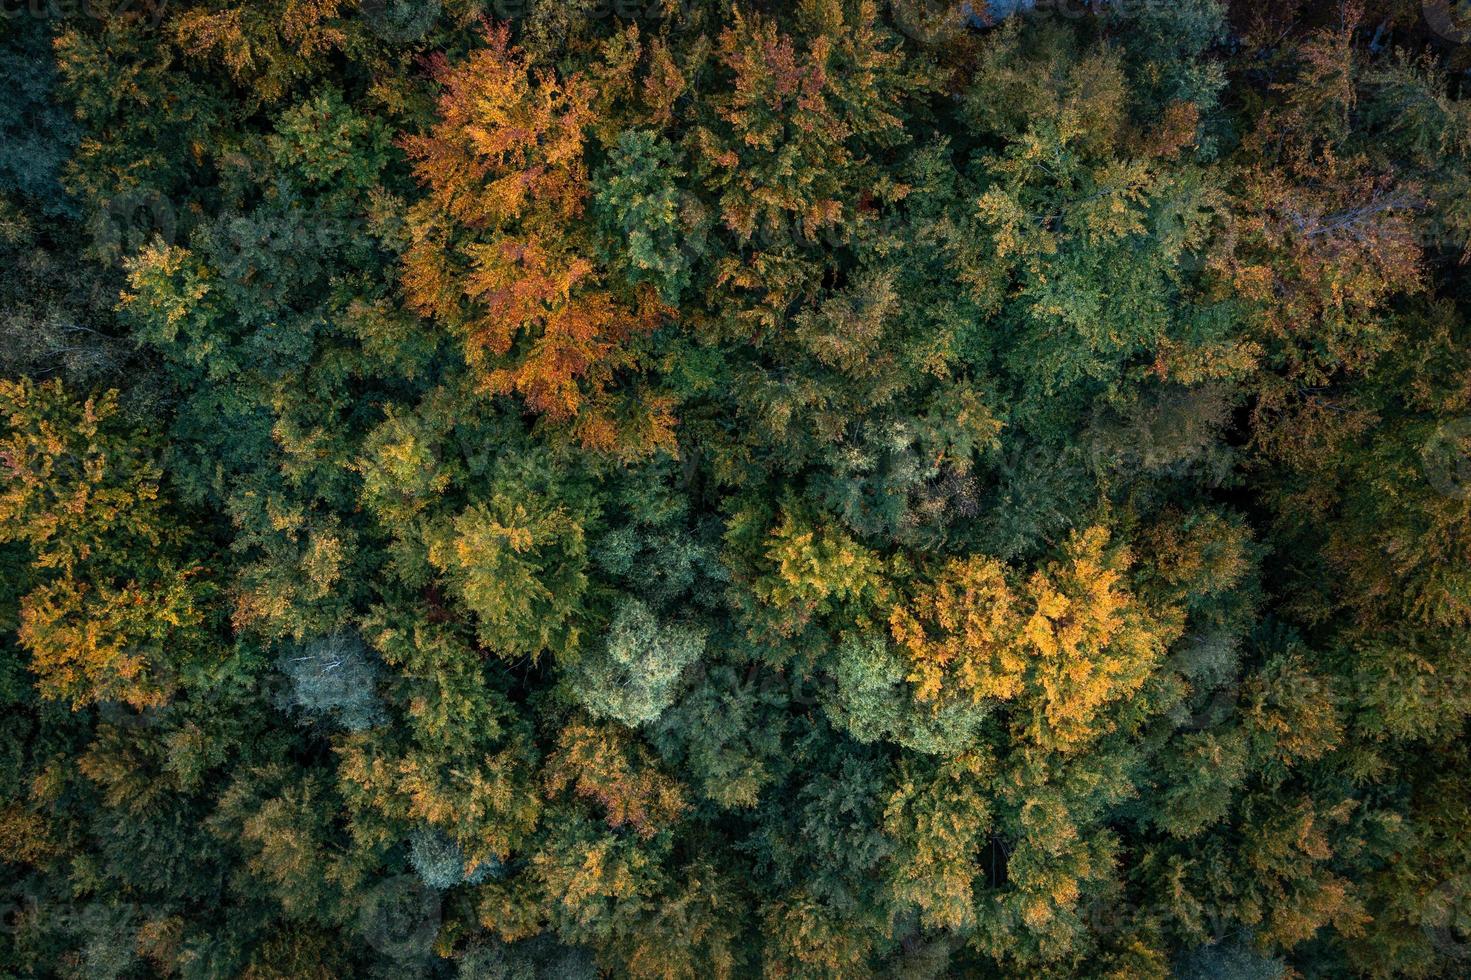 Colorful autumn trees photographed from above photo